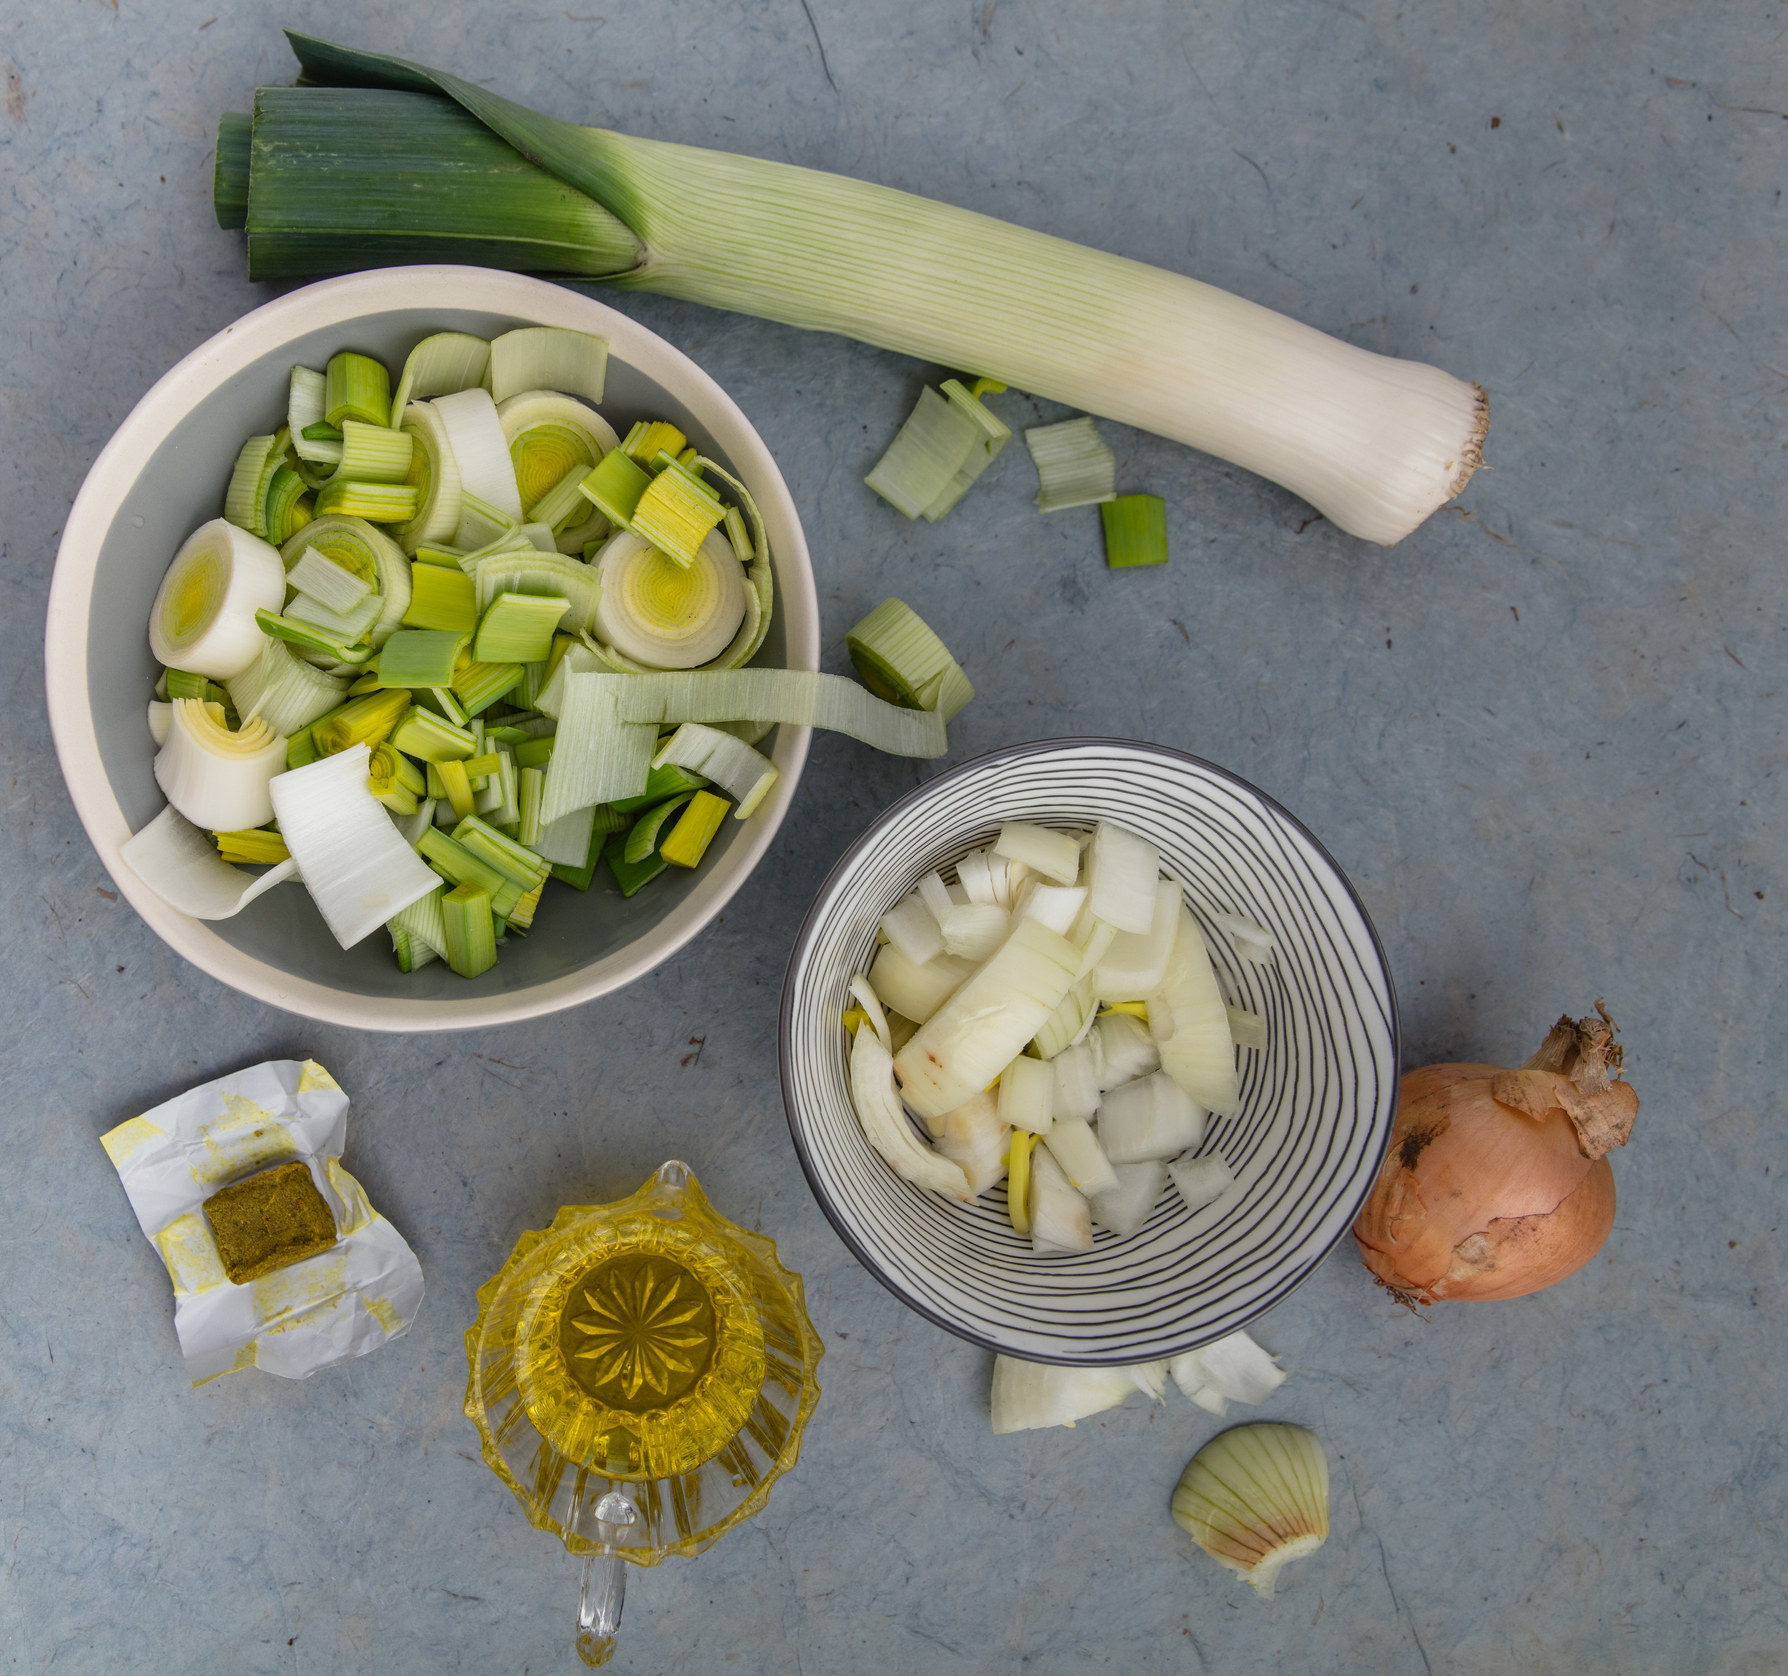 Leeks, onions, a bouillon cube, and olive oil